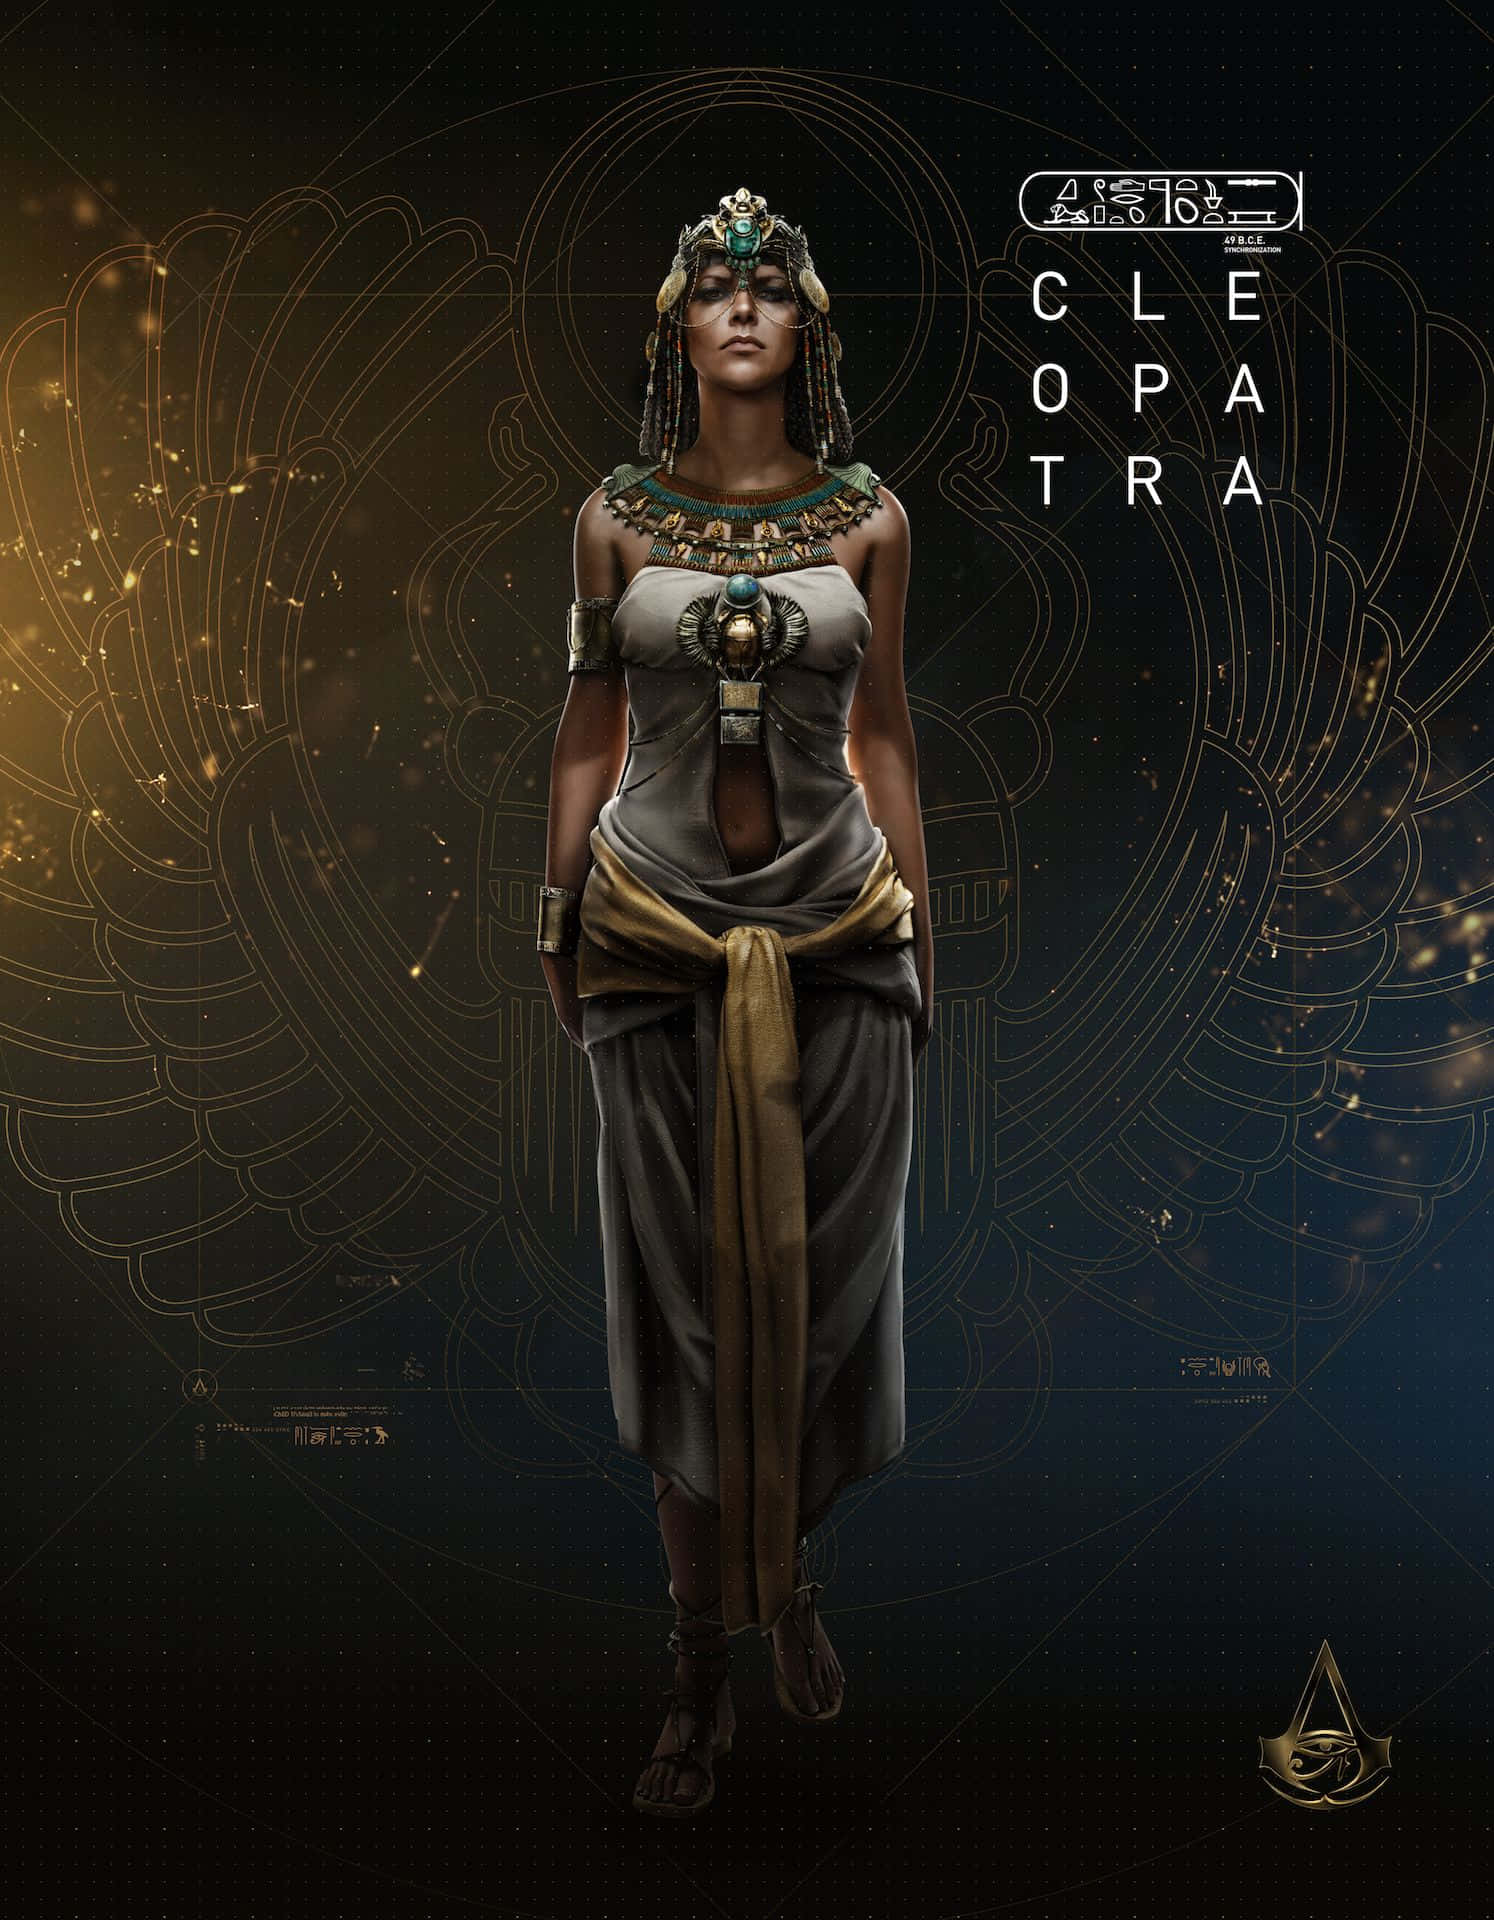 A portrait of the iconic ruler, Cleopatra